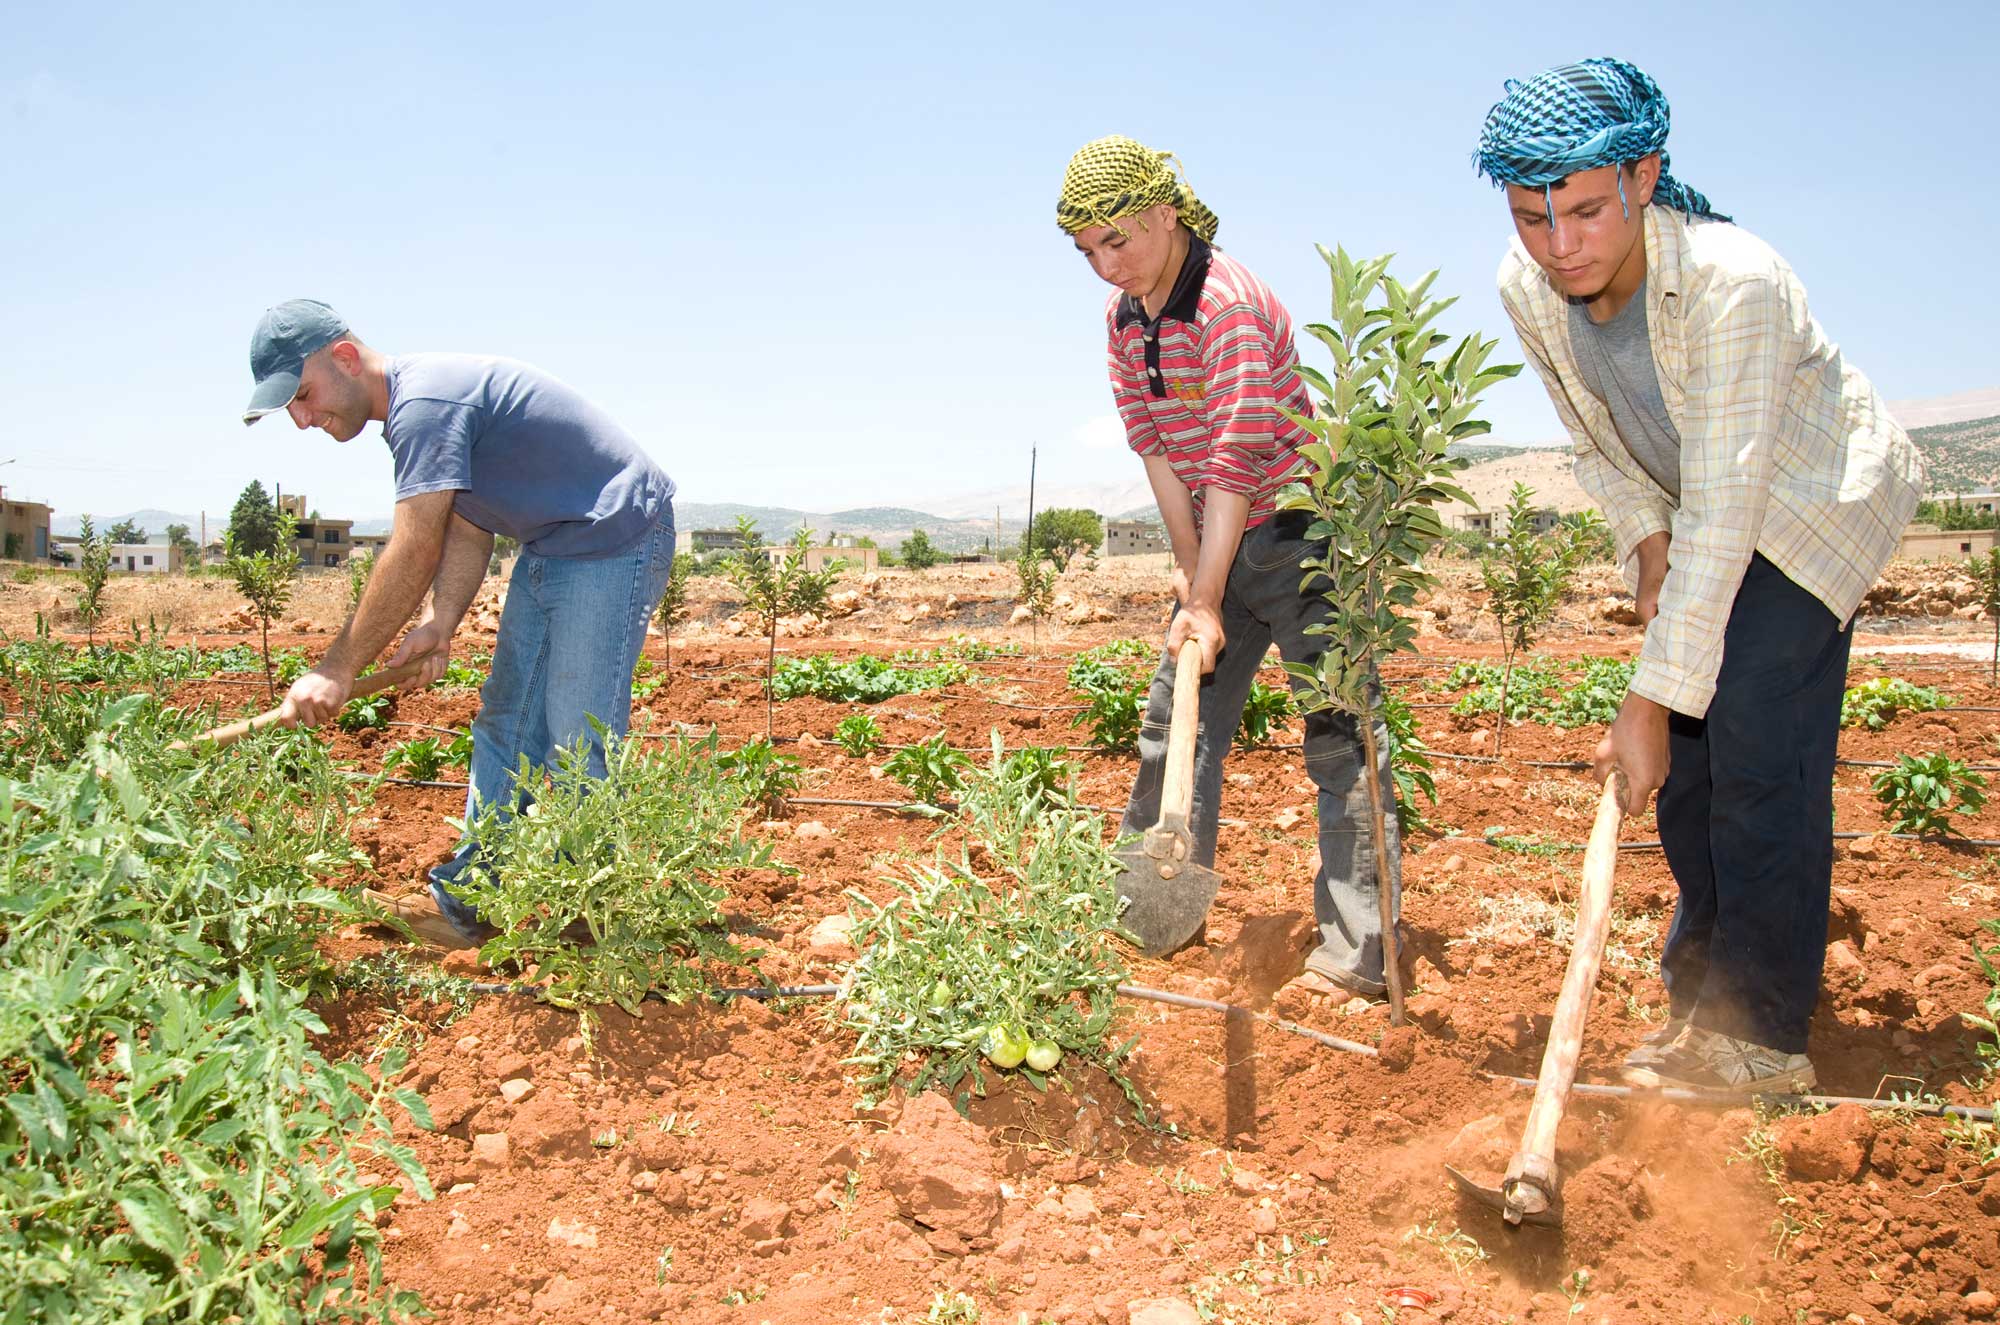 Several neighbors help Kozhaya Abou (left) tend fruit tree seedlings in the village of Deir Al Ahmar. Abou was one of 141 farmers in this area to receive fruit tree seedlings through Anera's tree project in 2010.